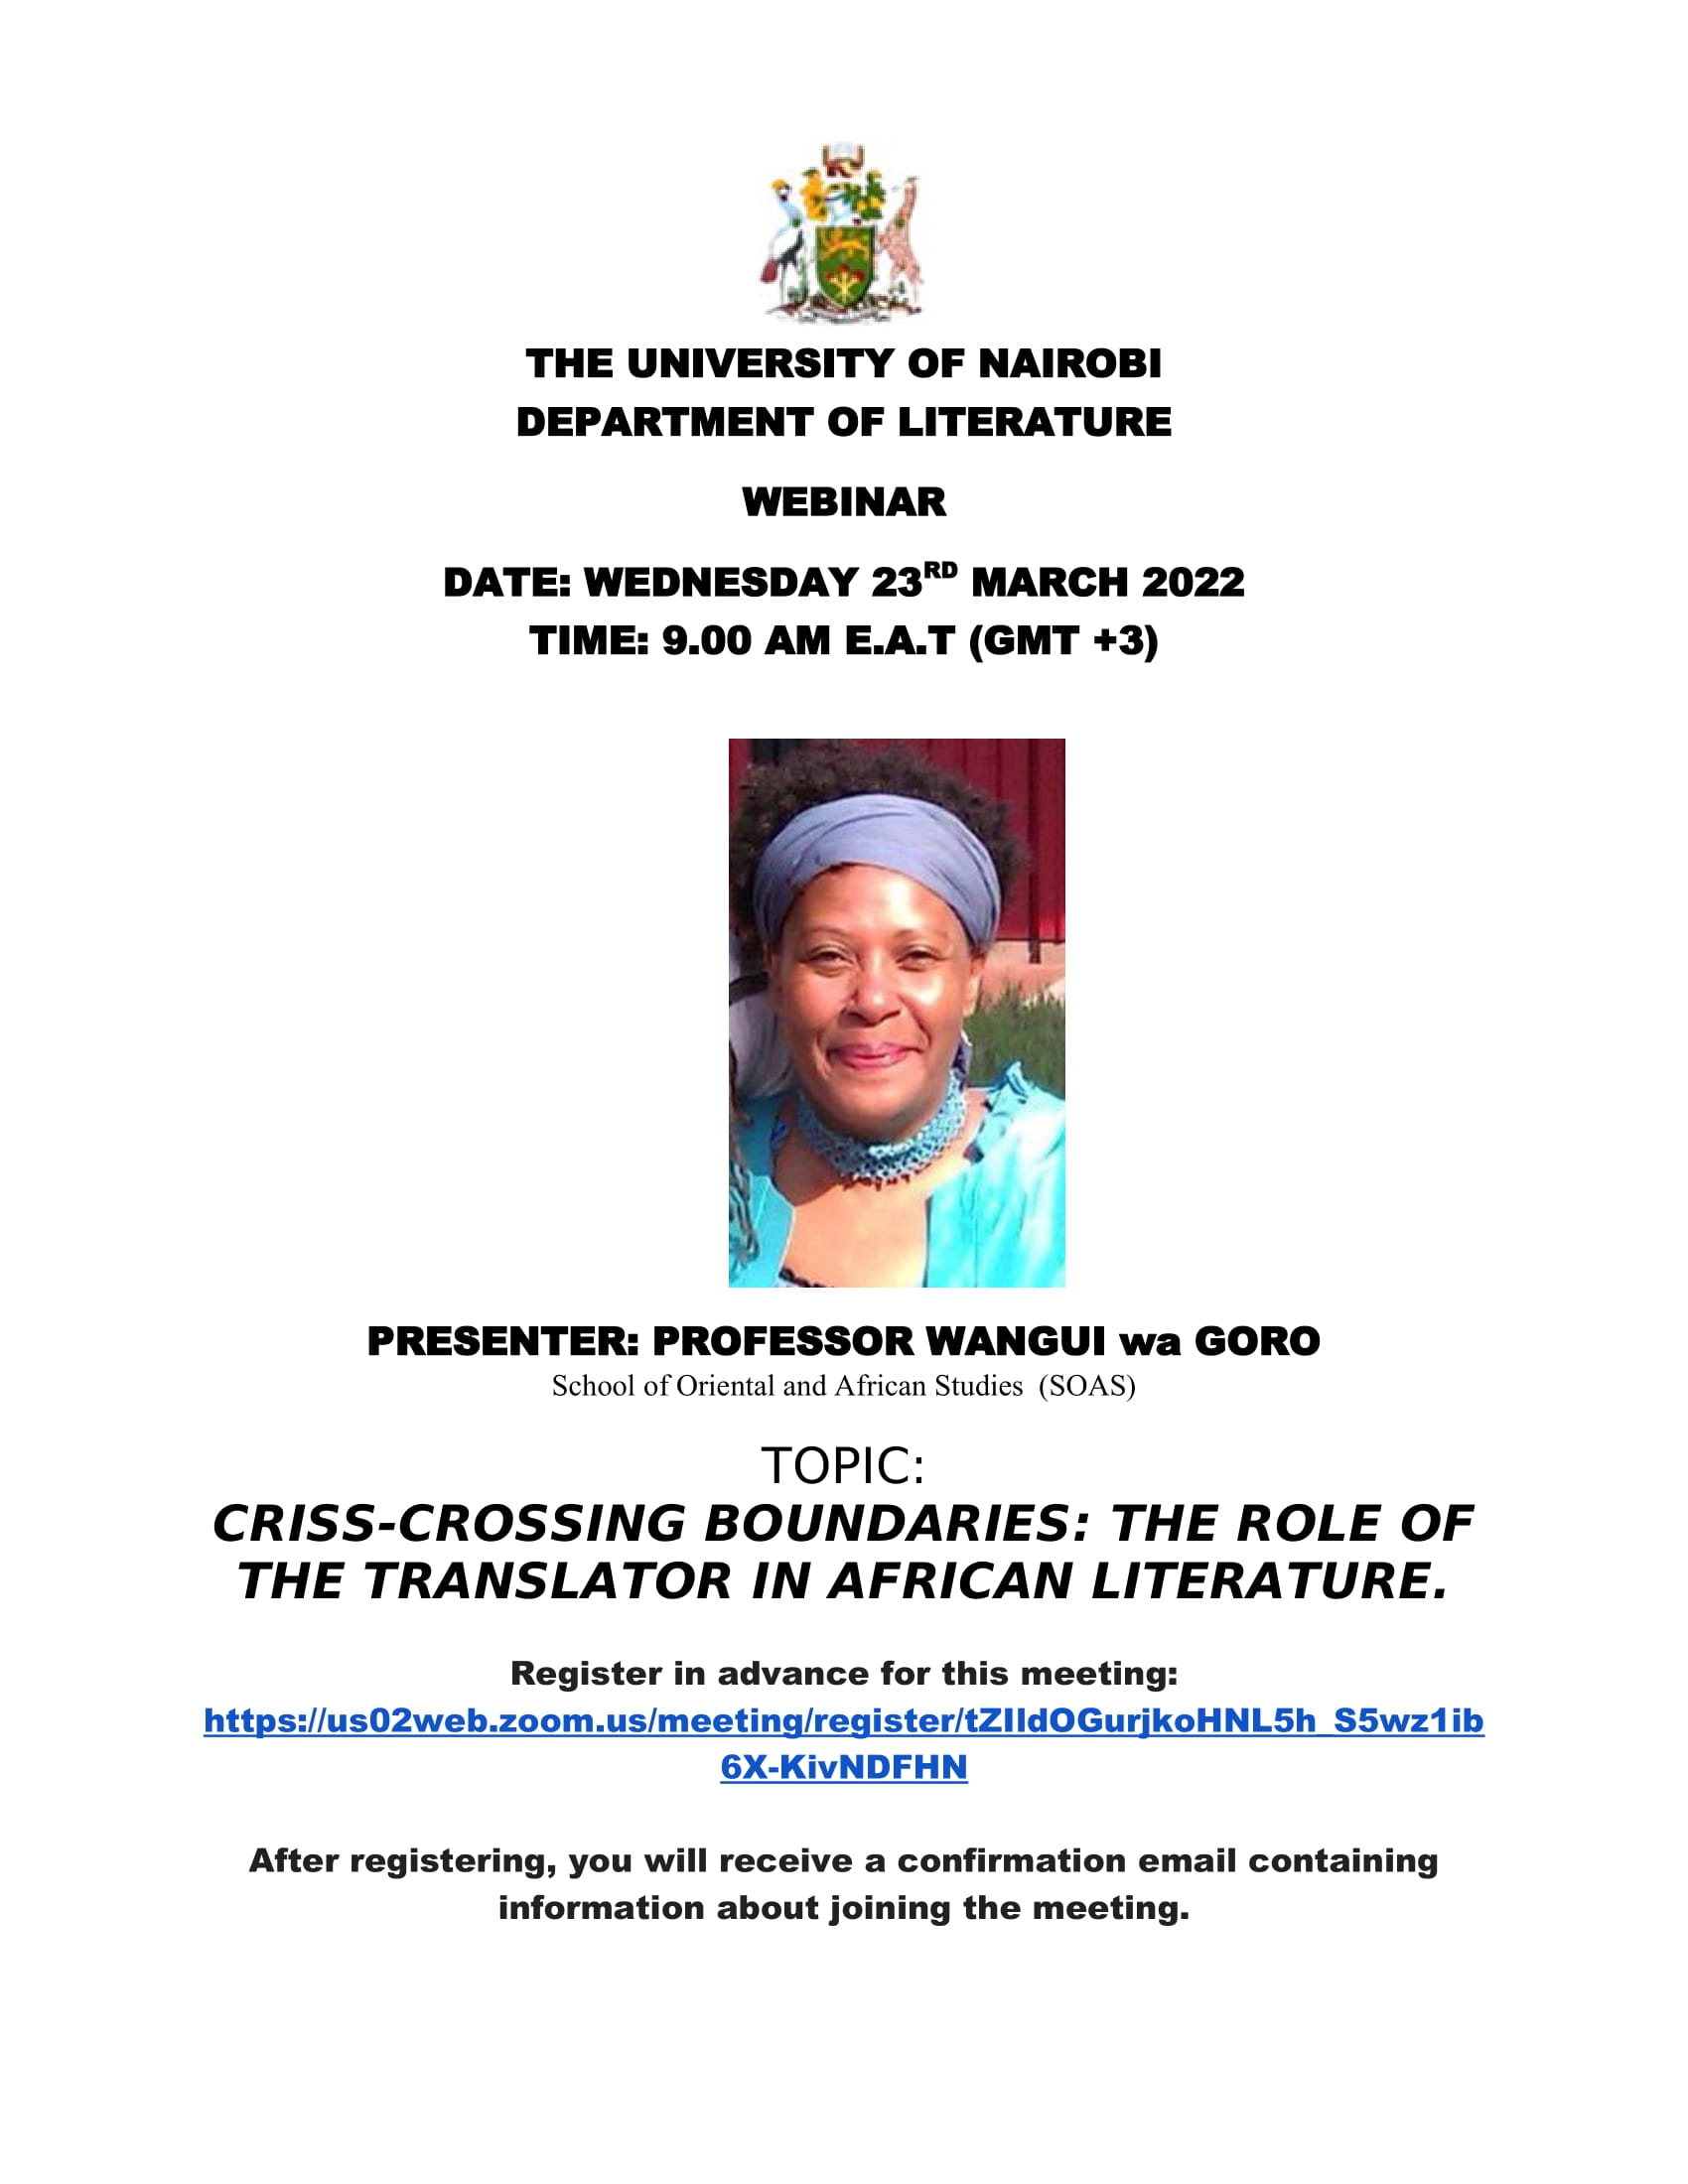 Webinar: 'CRISS-CROSSING BOUNDARIES : THE ROLE OF THE TRANSLATOR IN AFRICAN LITERATURE'